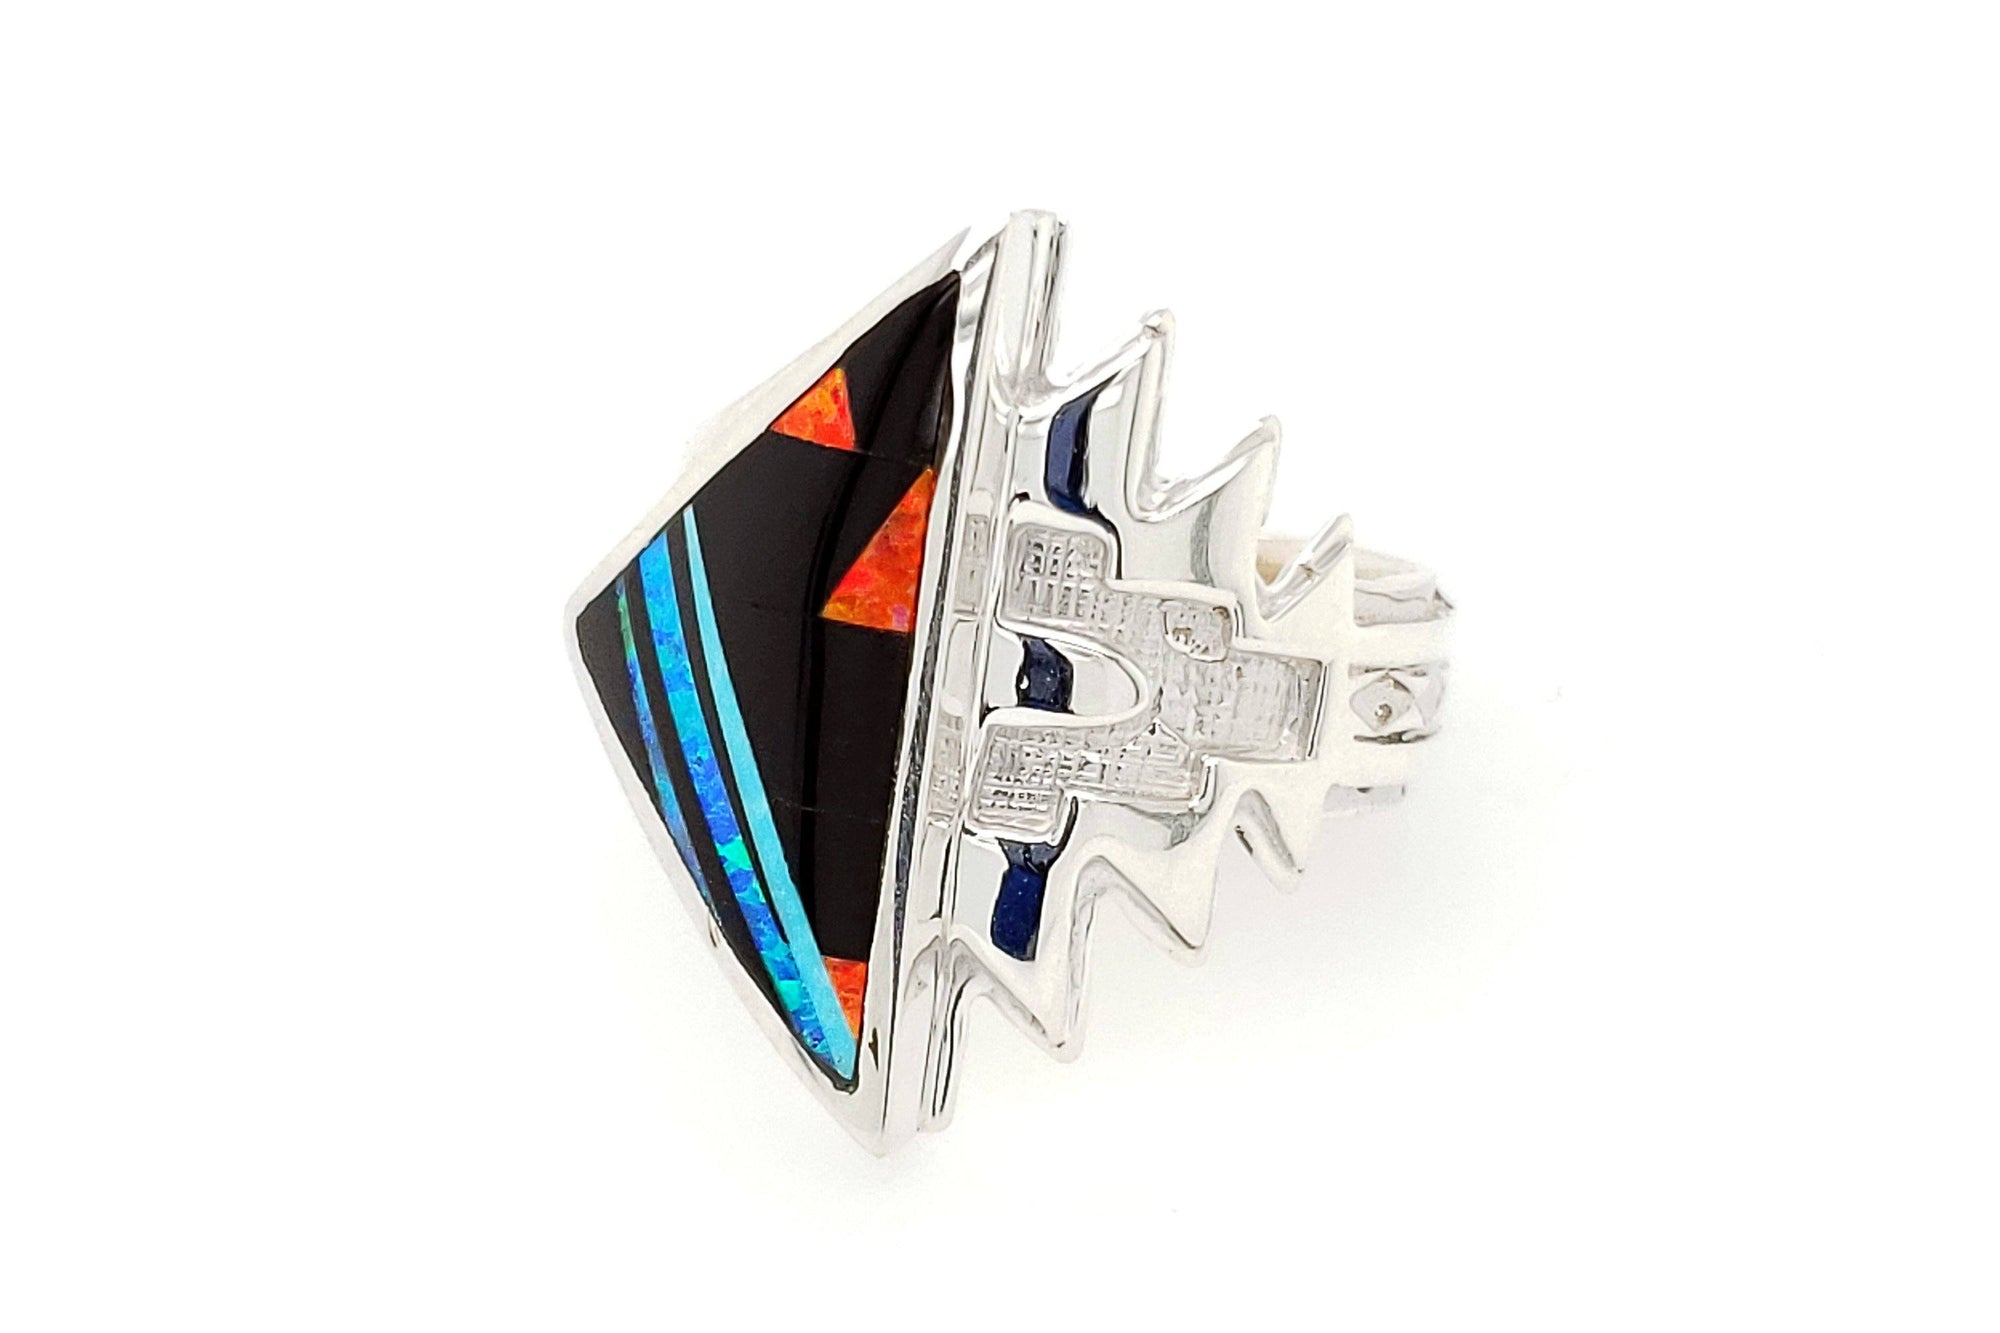 David Rosales Native American Ring with Arrow Styling - Side